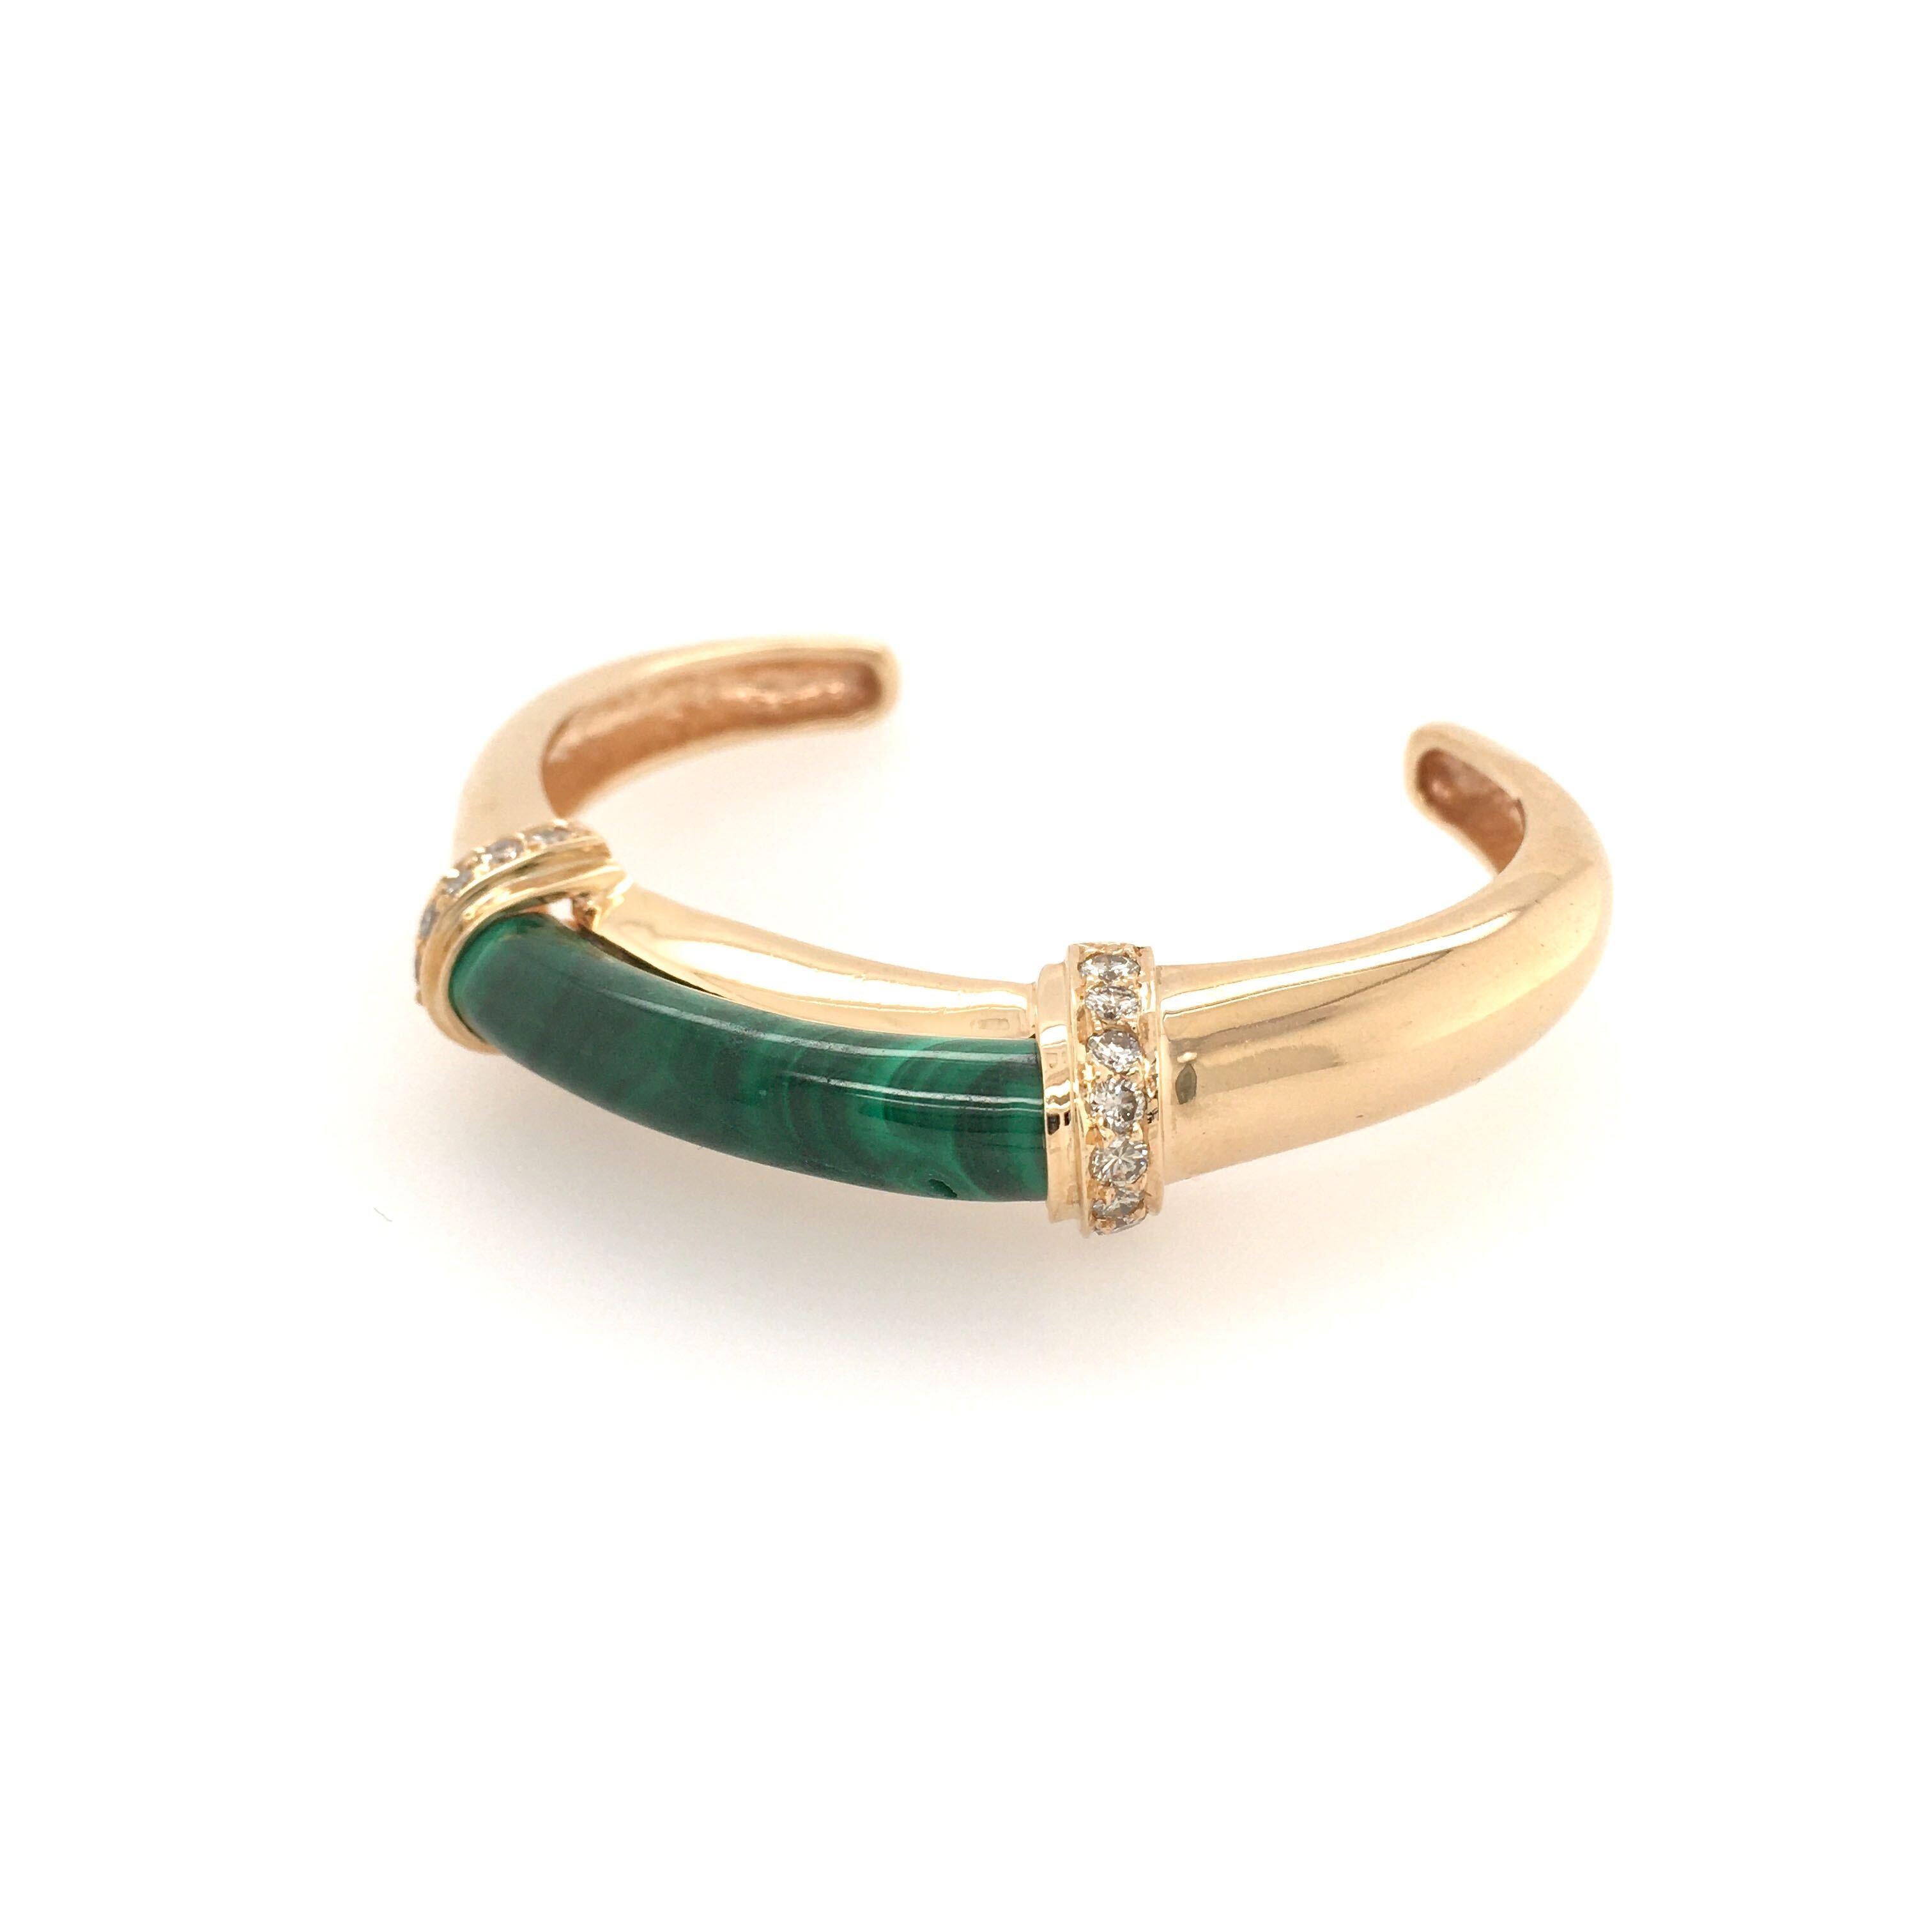 A set of three (3) 14 karat yellow gold, malachite and diamond cuff bracelets. Circa 1960. Each polished open cuff, set to the top with a malachite panel, two enhanced with pave diamond trim. Inside measurement 4 1/2 inches, gross weight is